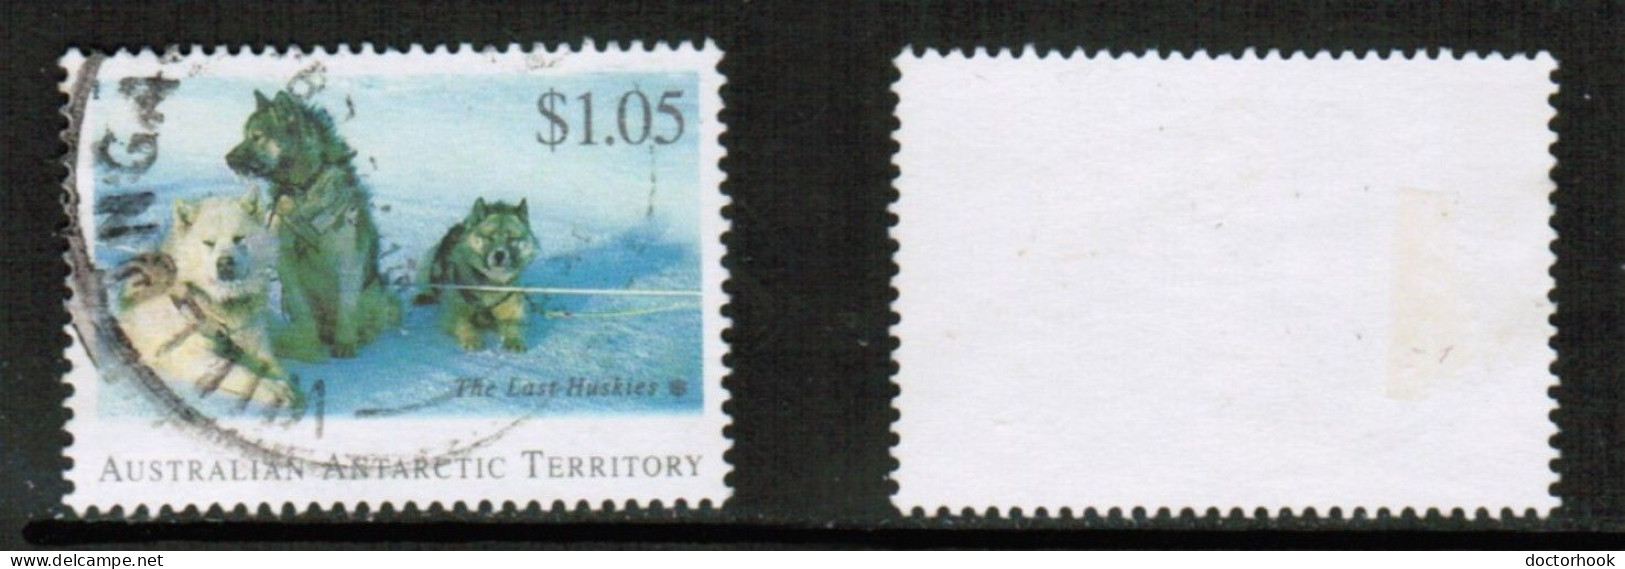 AUSTRALIAN ANTARCTIC TERRITORY   Scott # L 93 USED (CONDITION AS PER SCAN) (Stamp Scan # 929-3) - Gebraucht